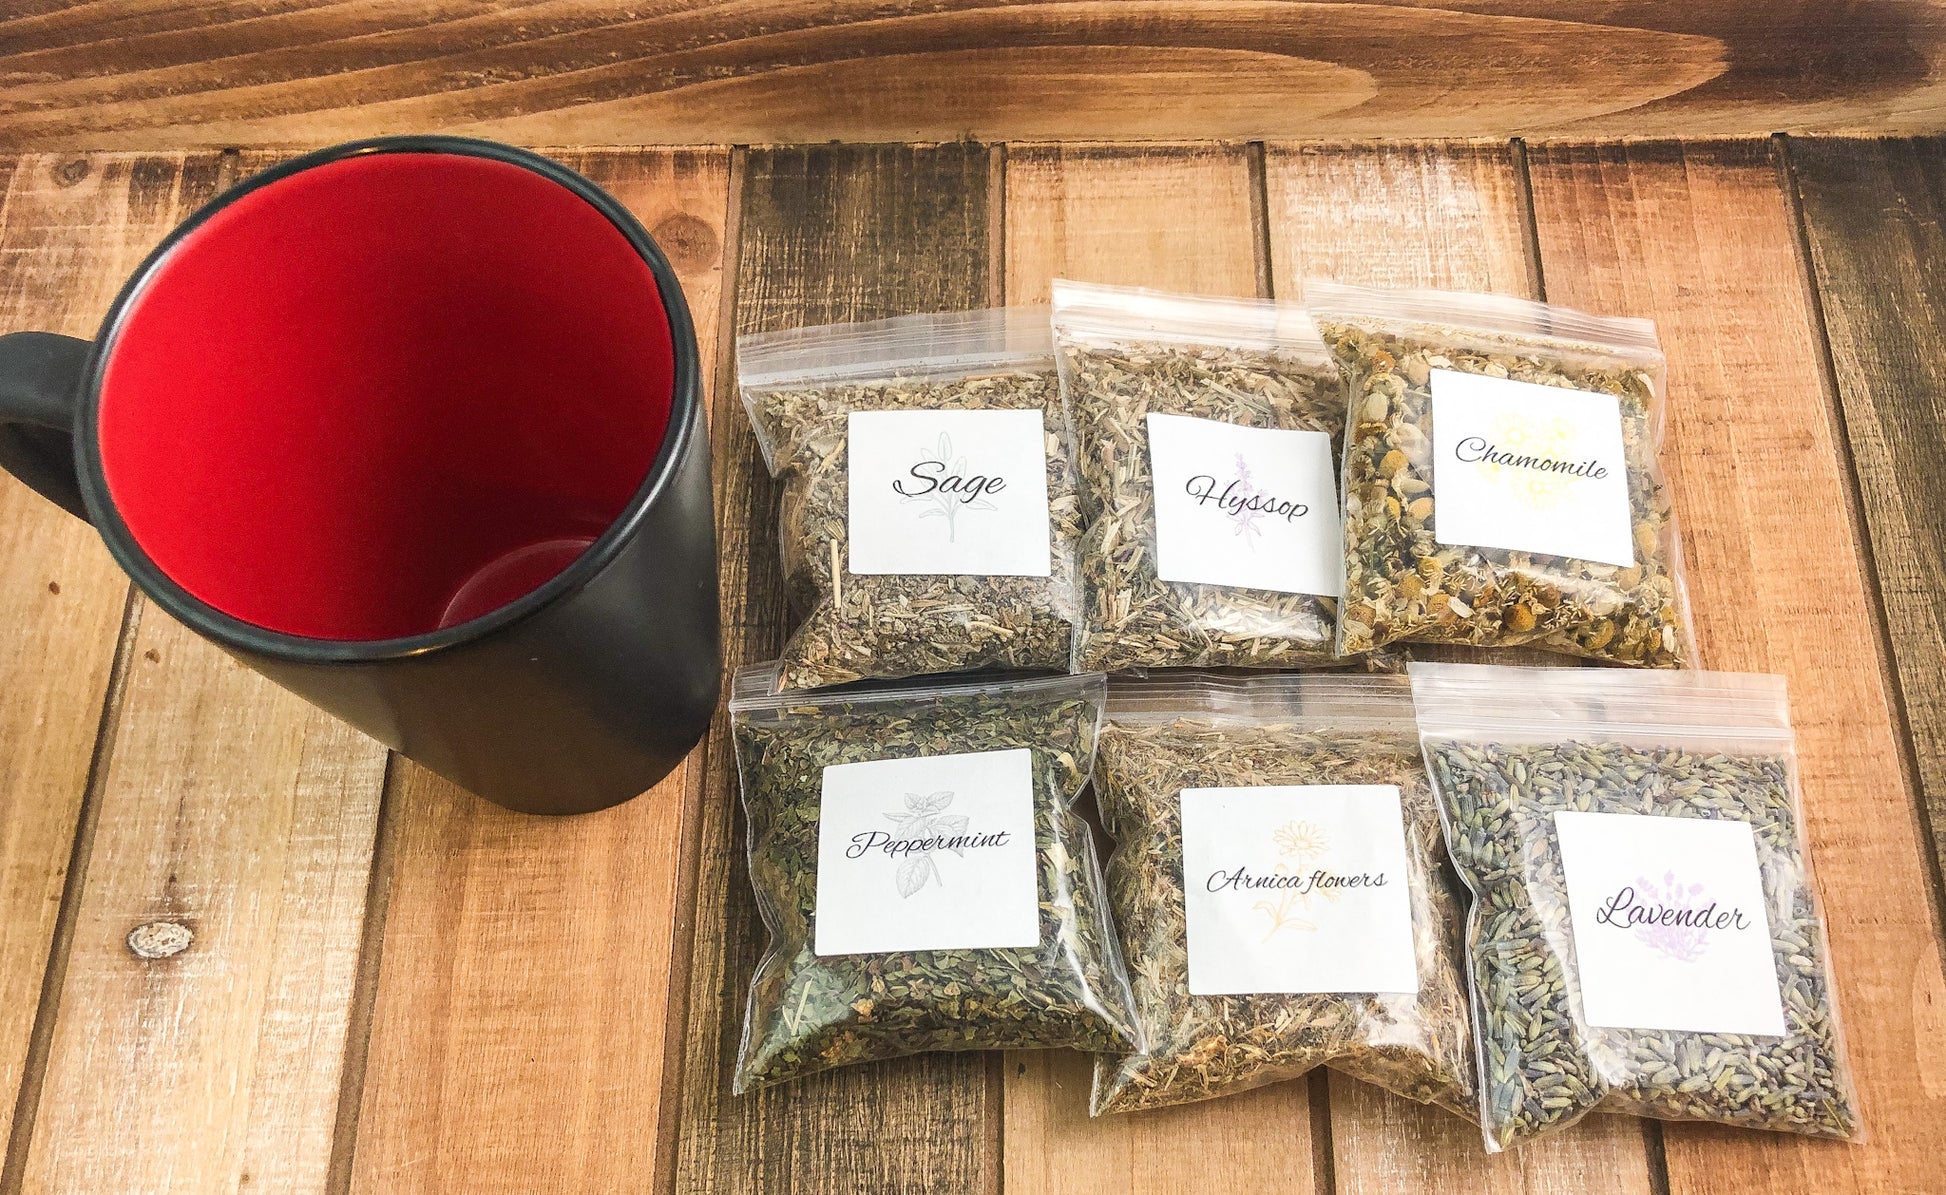 herbal sample pack; 6 8g bags of dried herbs laying next to a black and red coffee mug on a wooden table with white background